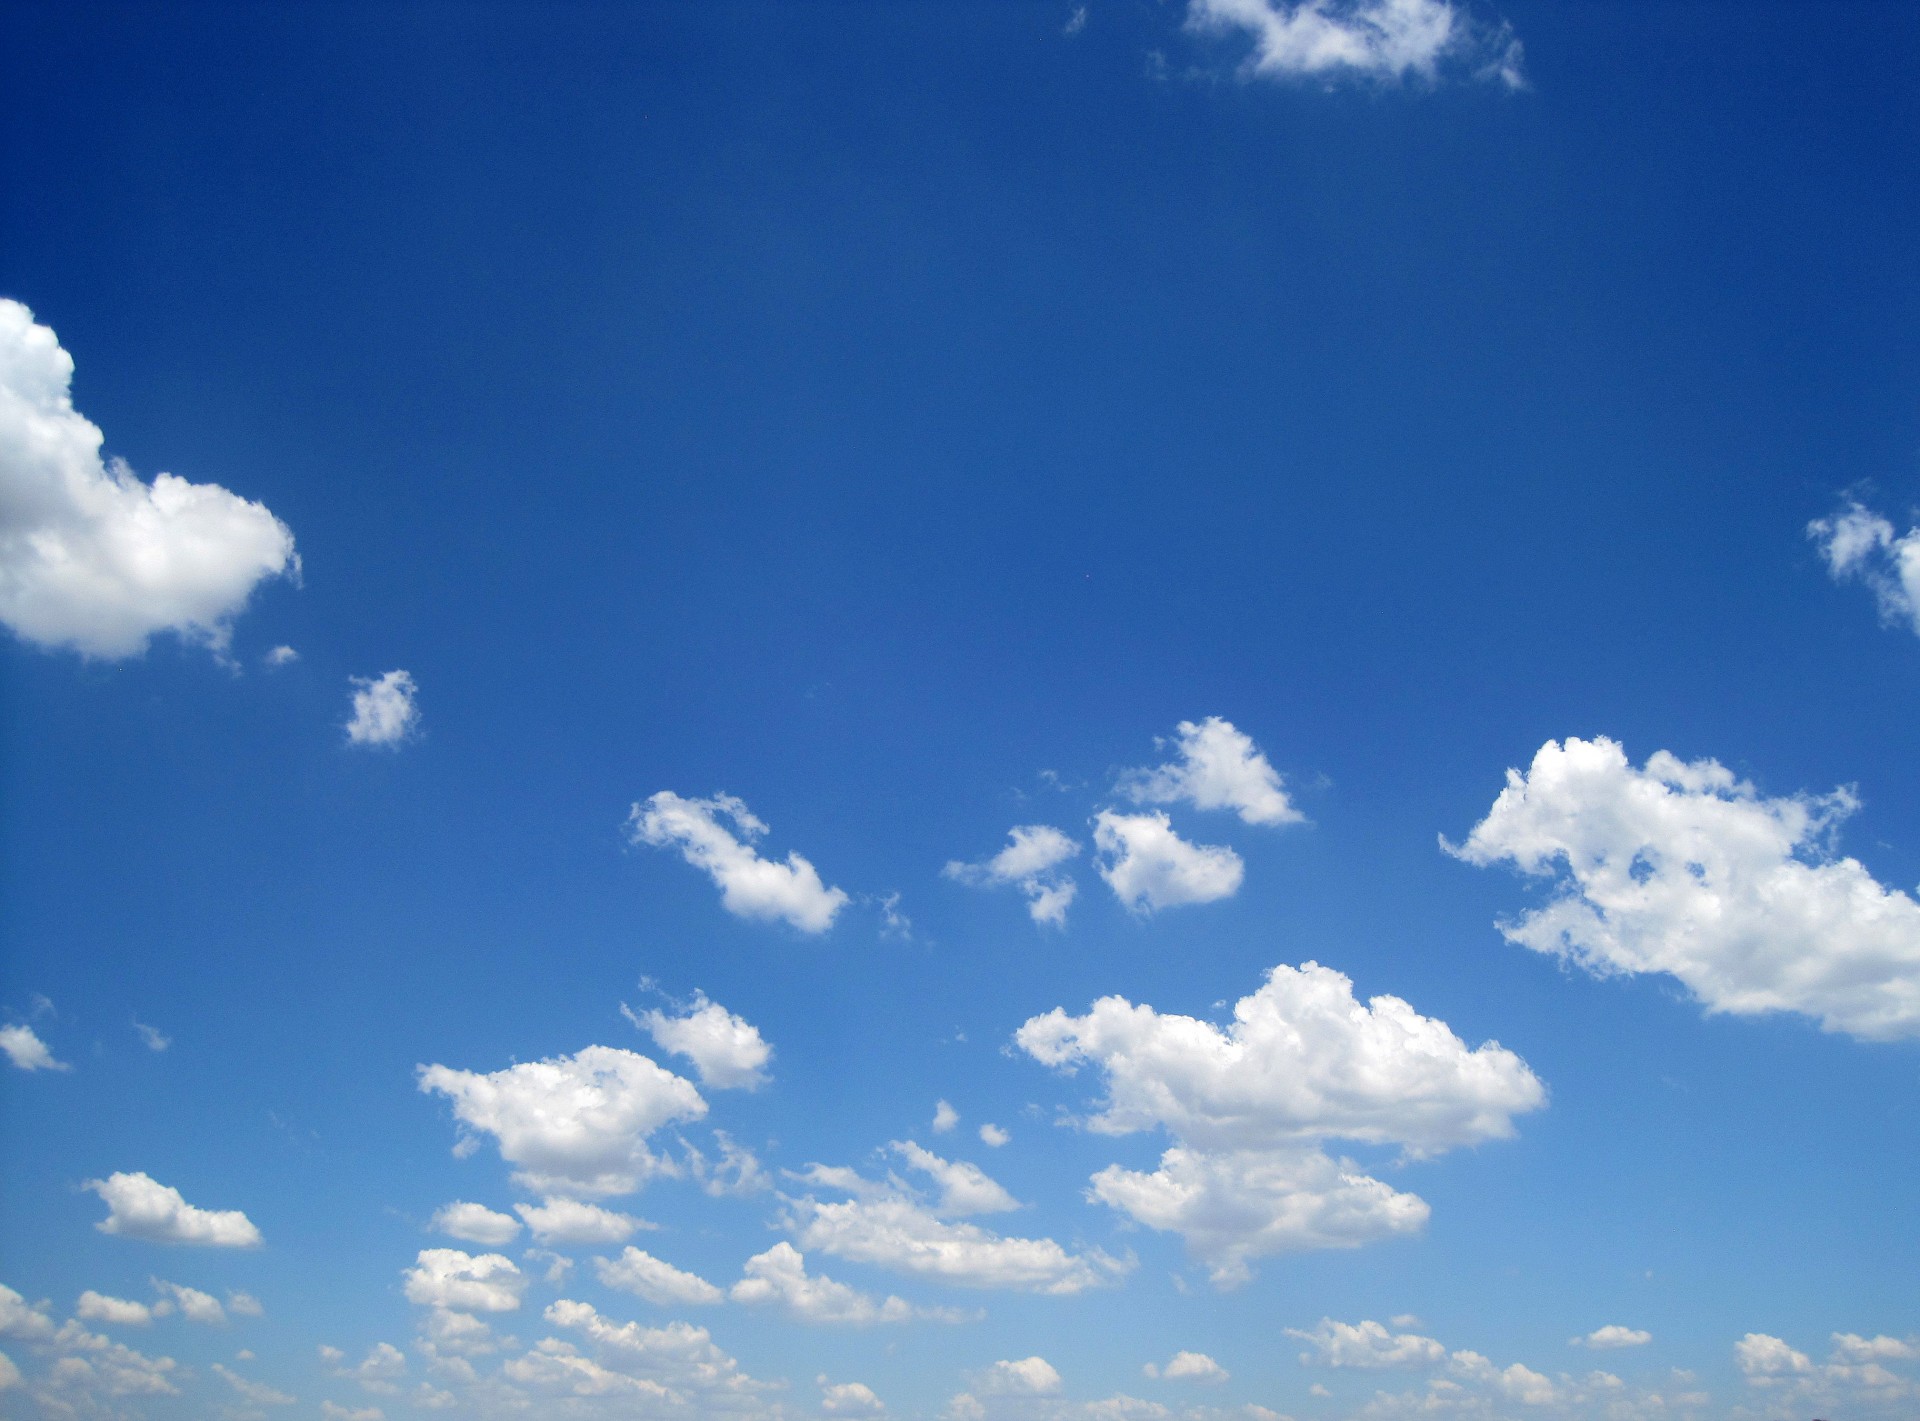 https://storage.needpix.com/rsynced_images/blue-sky-with-drifting-clouds.jpg